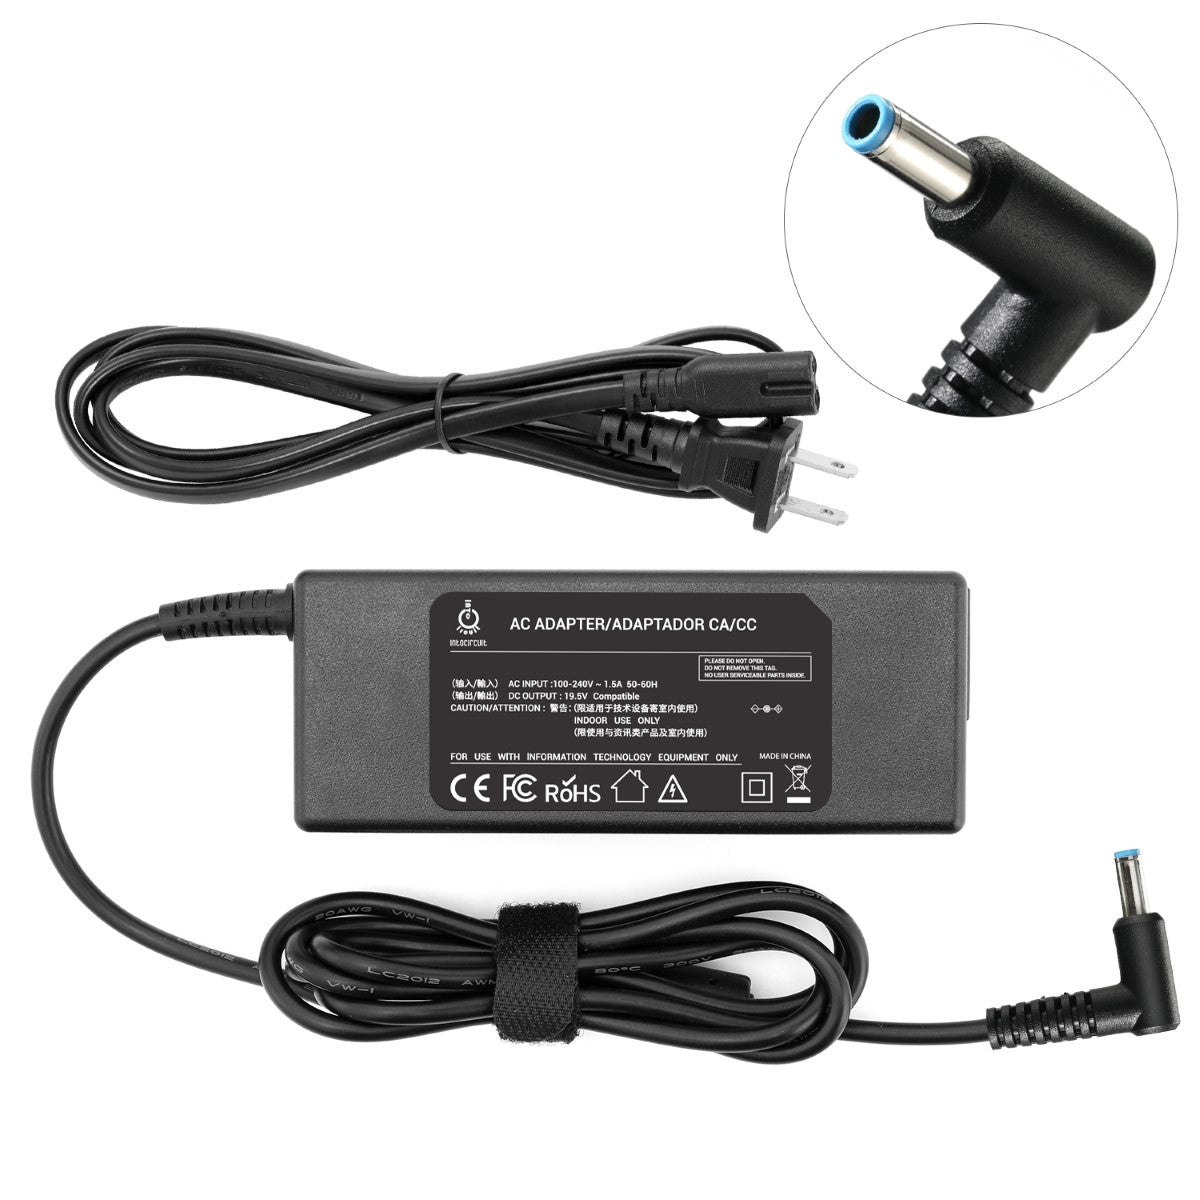 Charger for HP Spectre 13-s120nr x360 Laptop